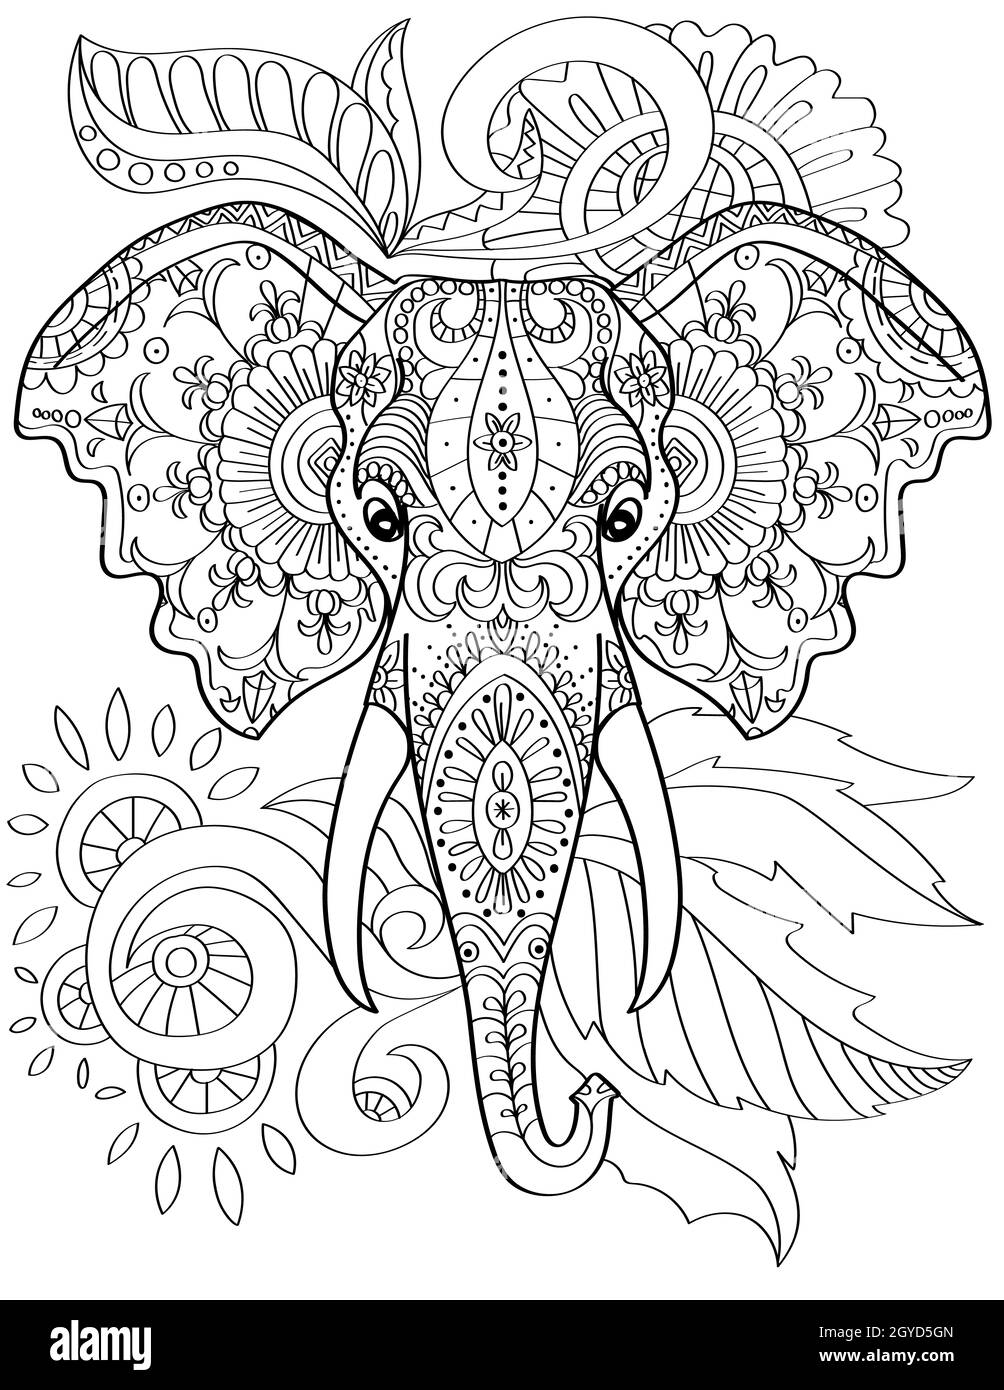 Large Elephant Head With Two Tusks Faces Forward Colorless Line Drawing. Stock Photo